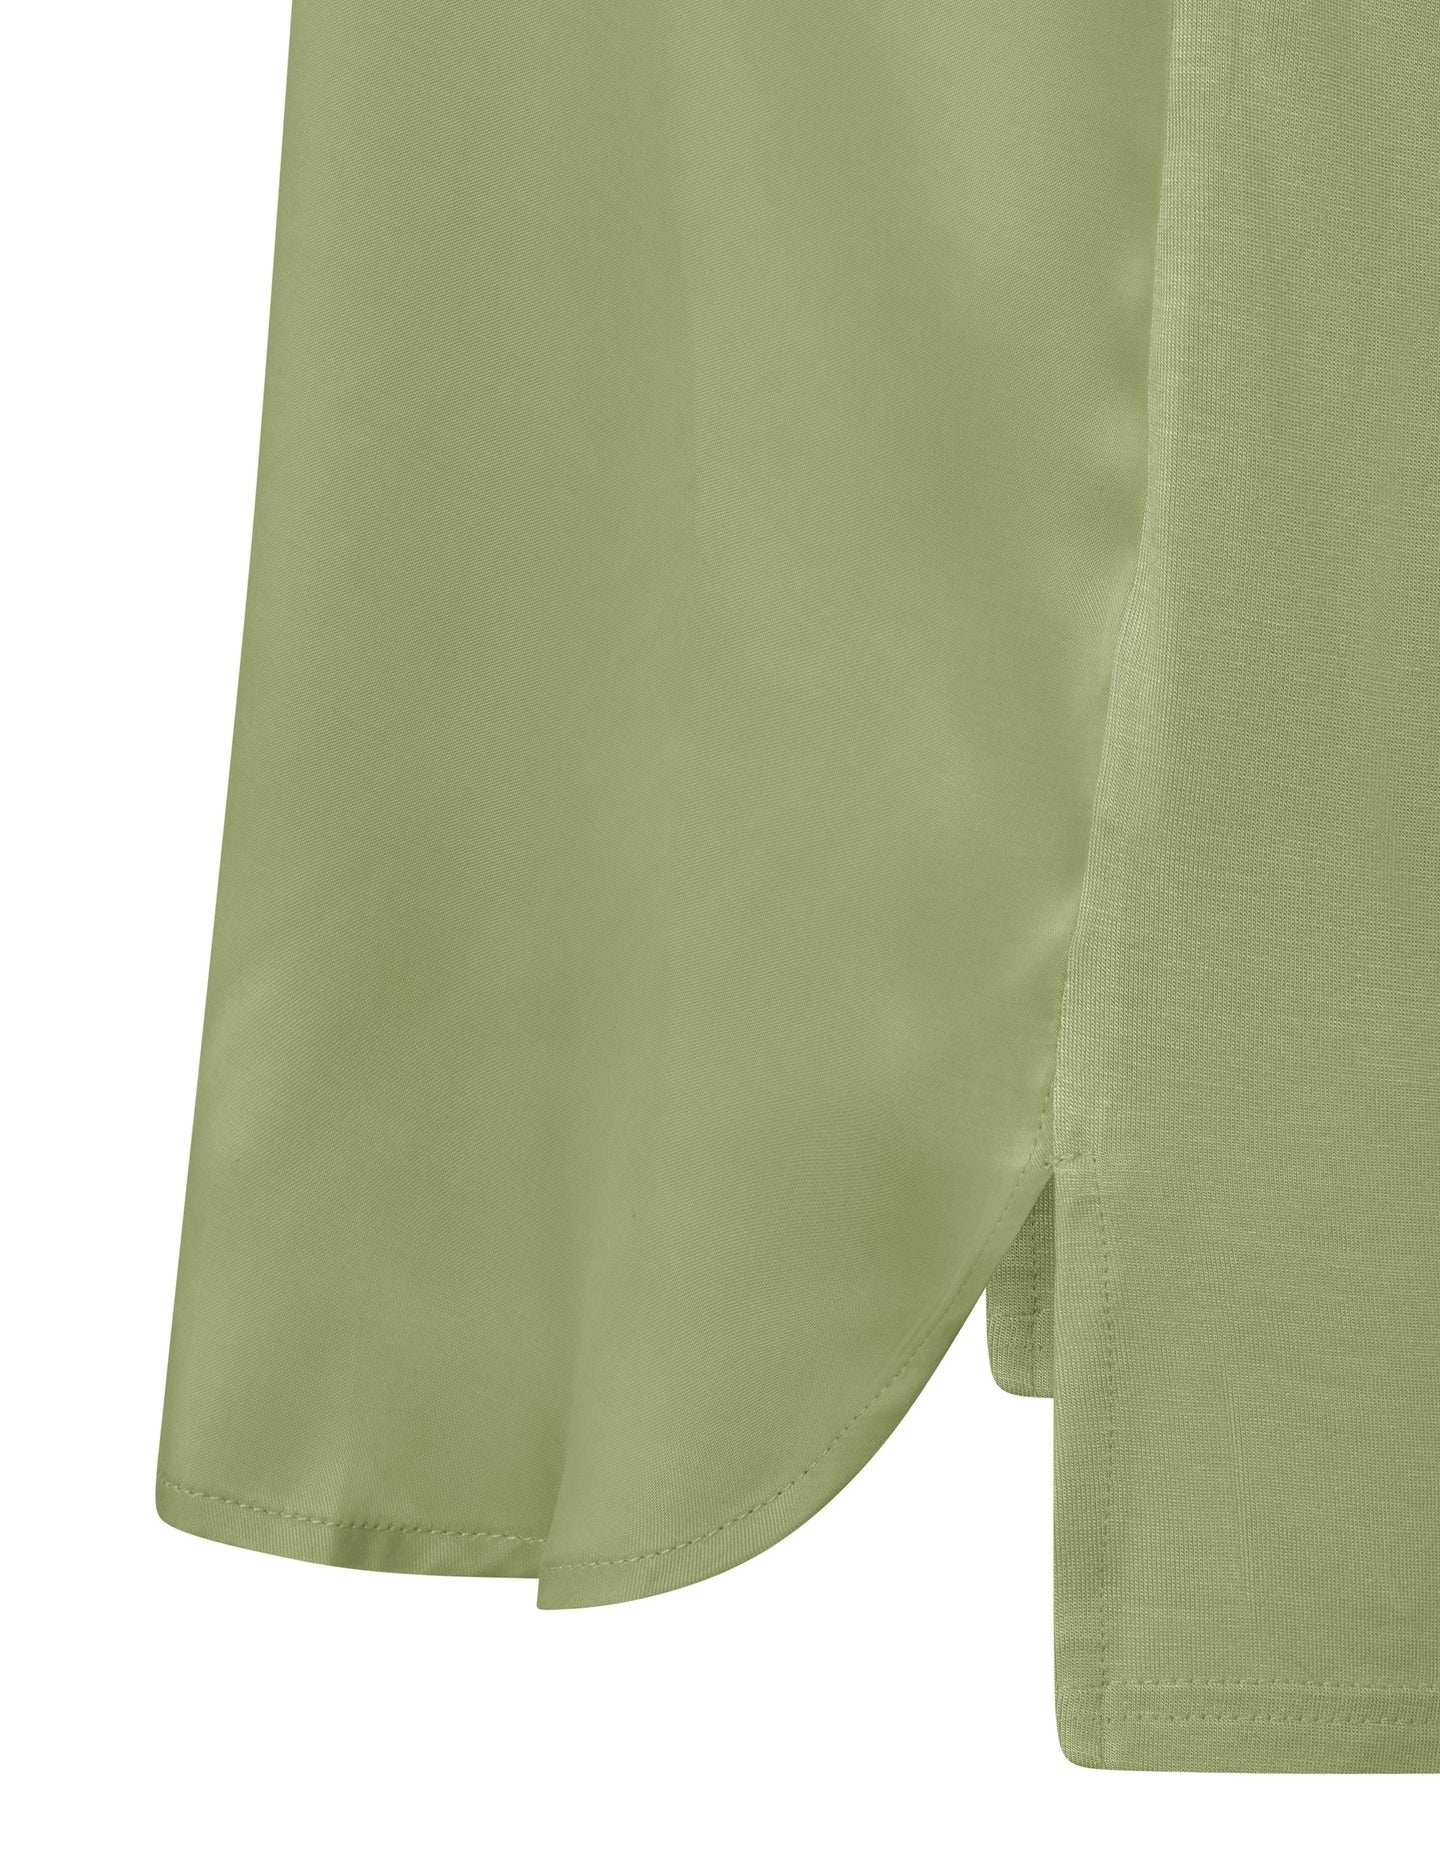 sleeveless-top-with-round-neck-in-fabric-mix-sage-green_2880x_77319103-8aa8-4eae-9913-c85636372449.jpg